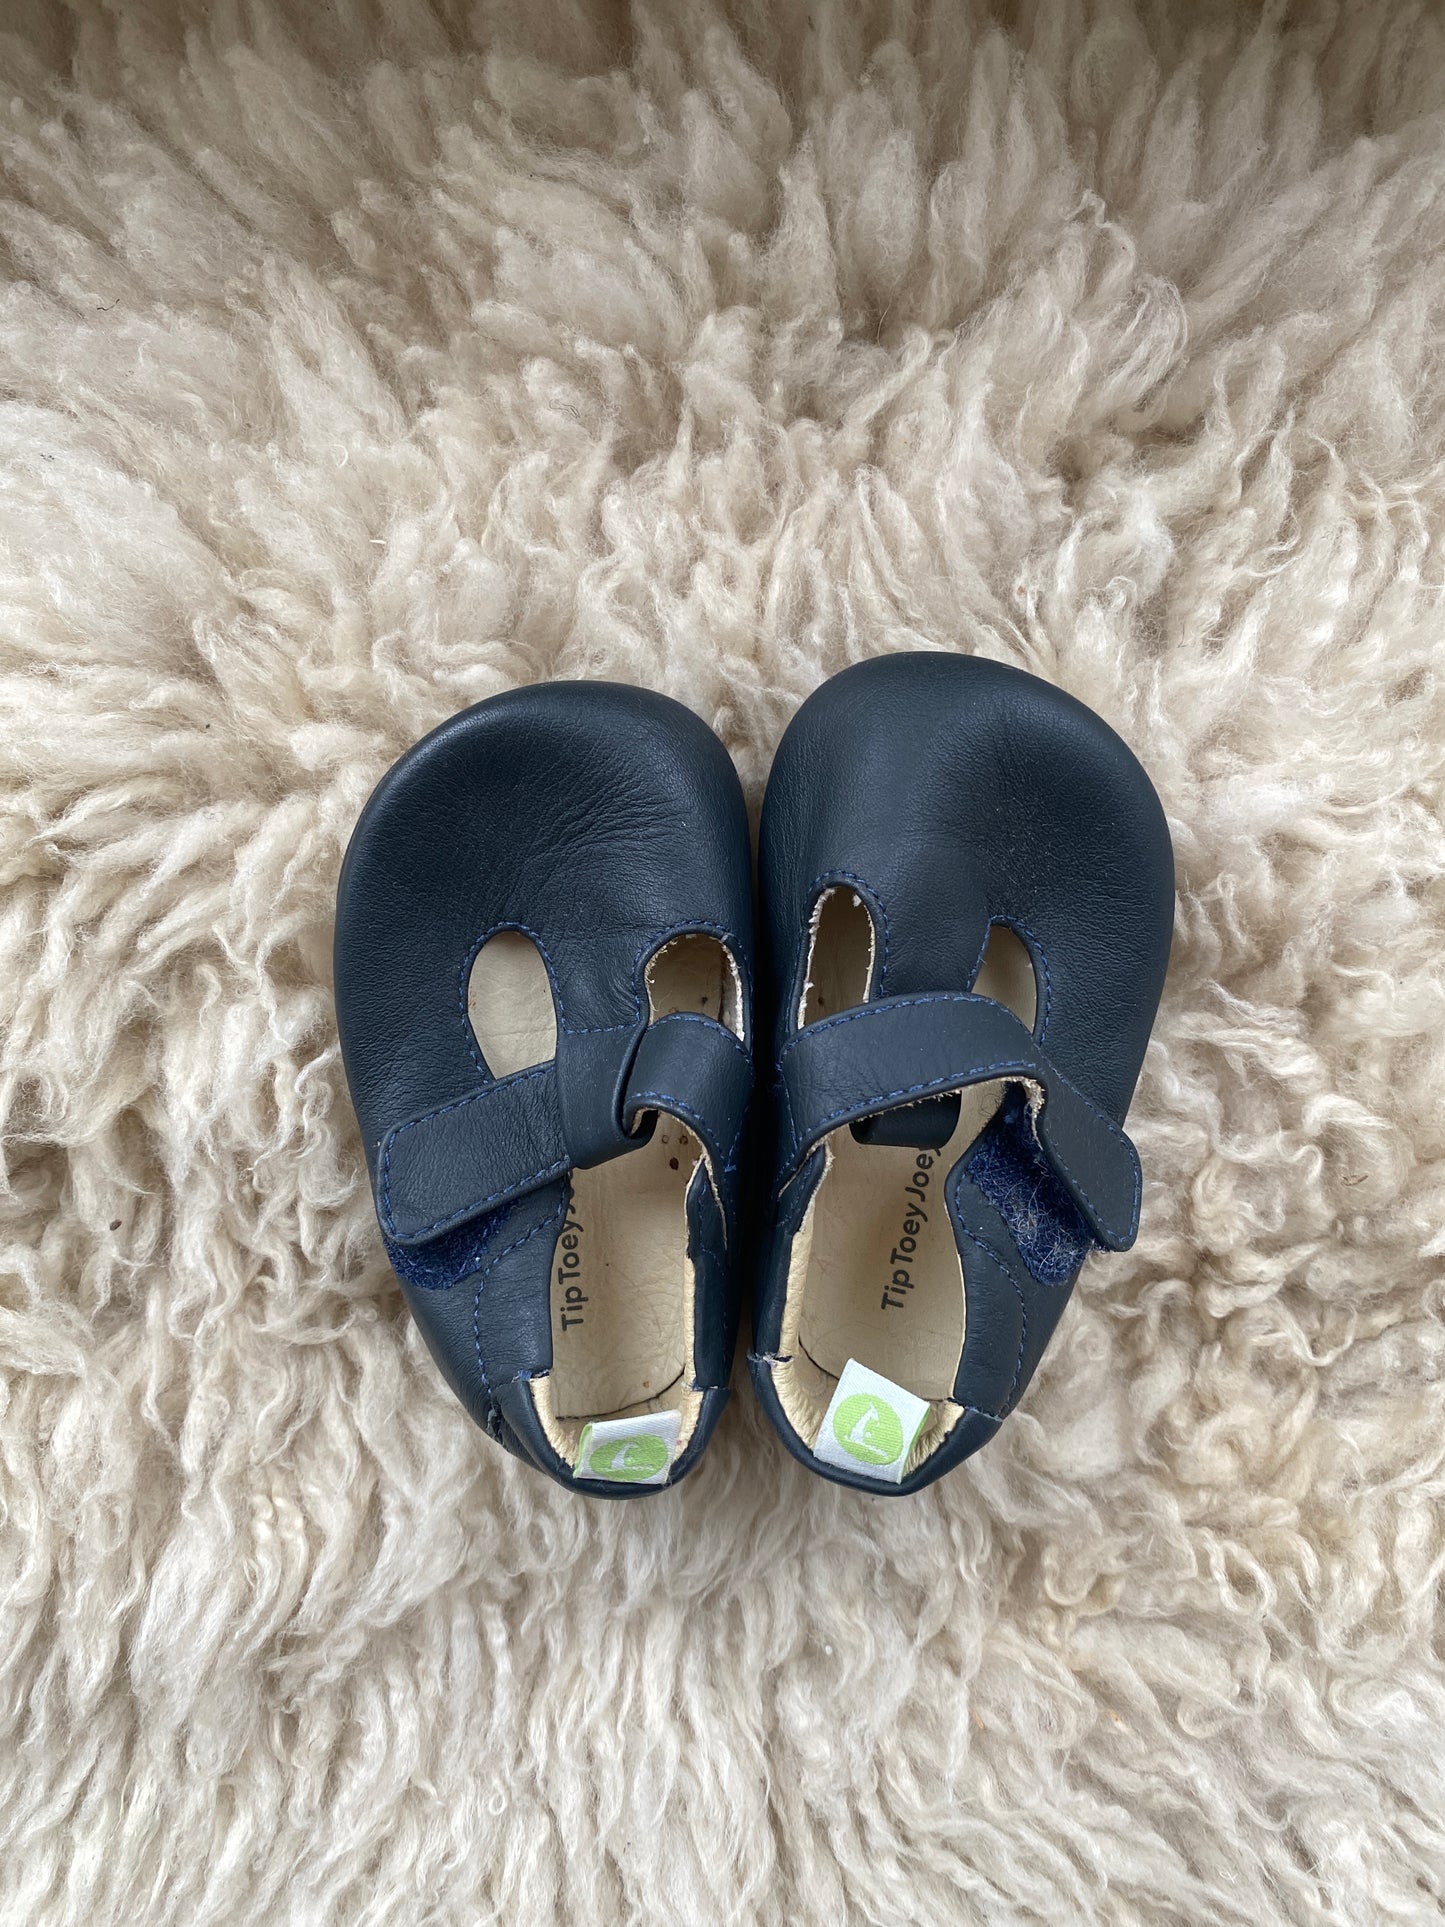 tip toey joey baby Mary janes, size 3